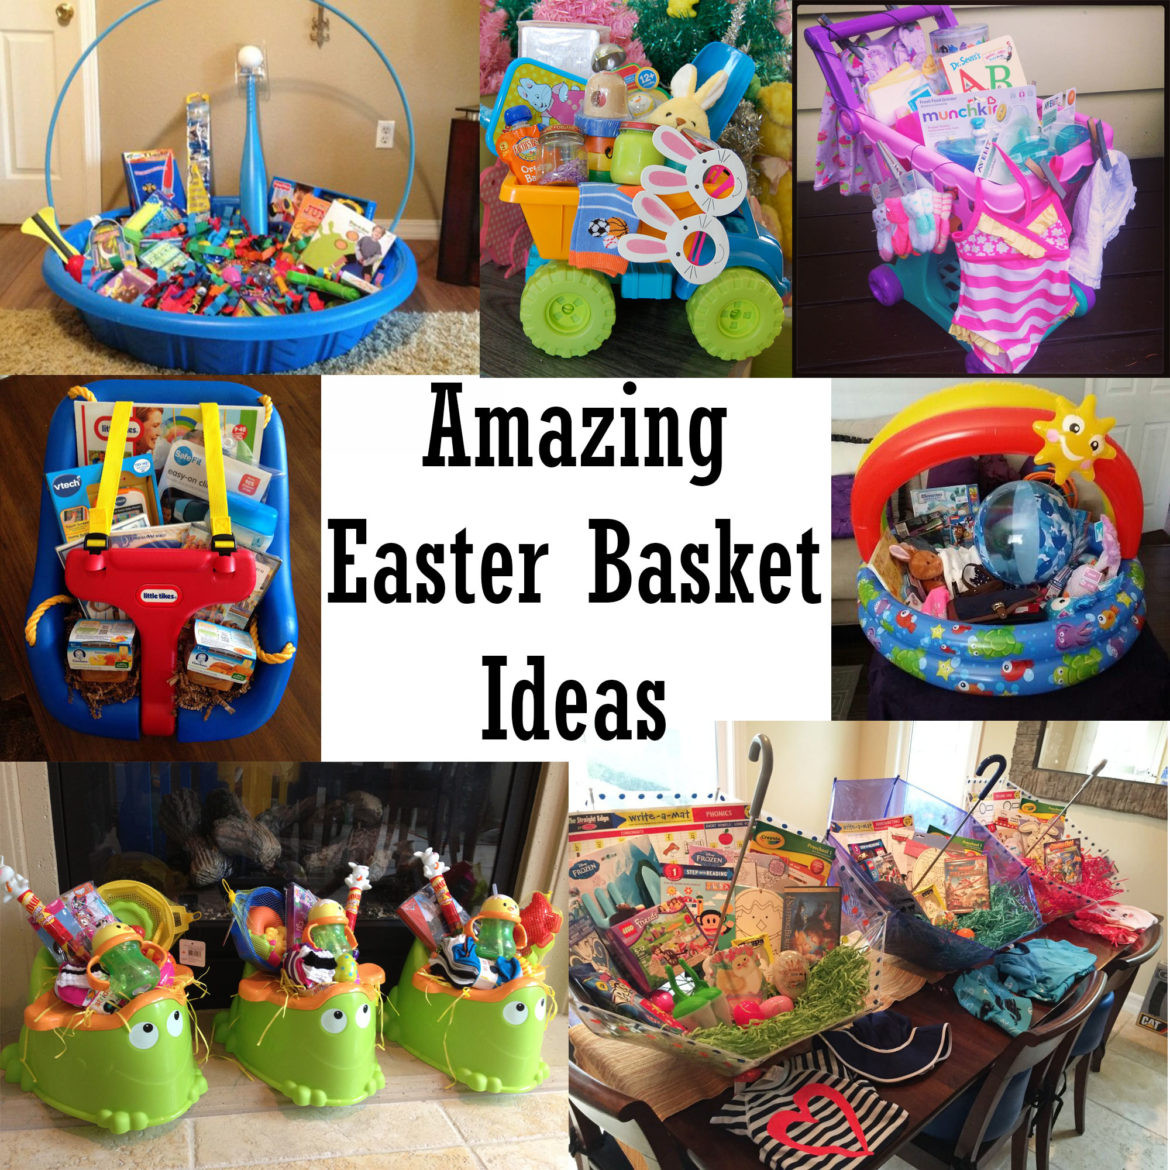 Easter Gift Baskets Ideas
 Amazing Easter Basket Ideas The Keeper of the Cheerios